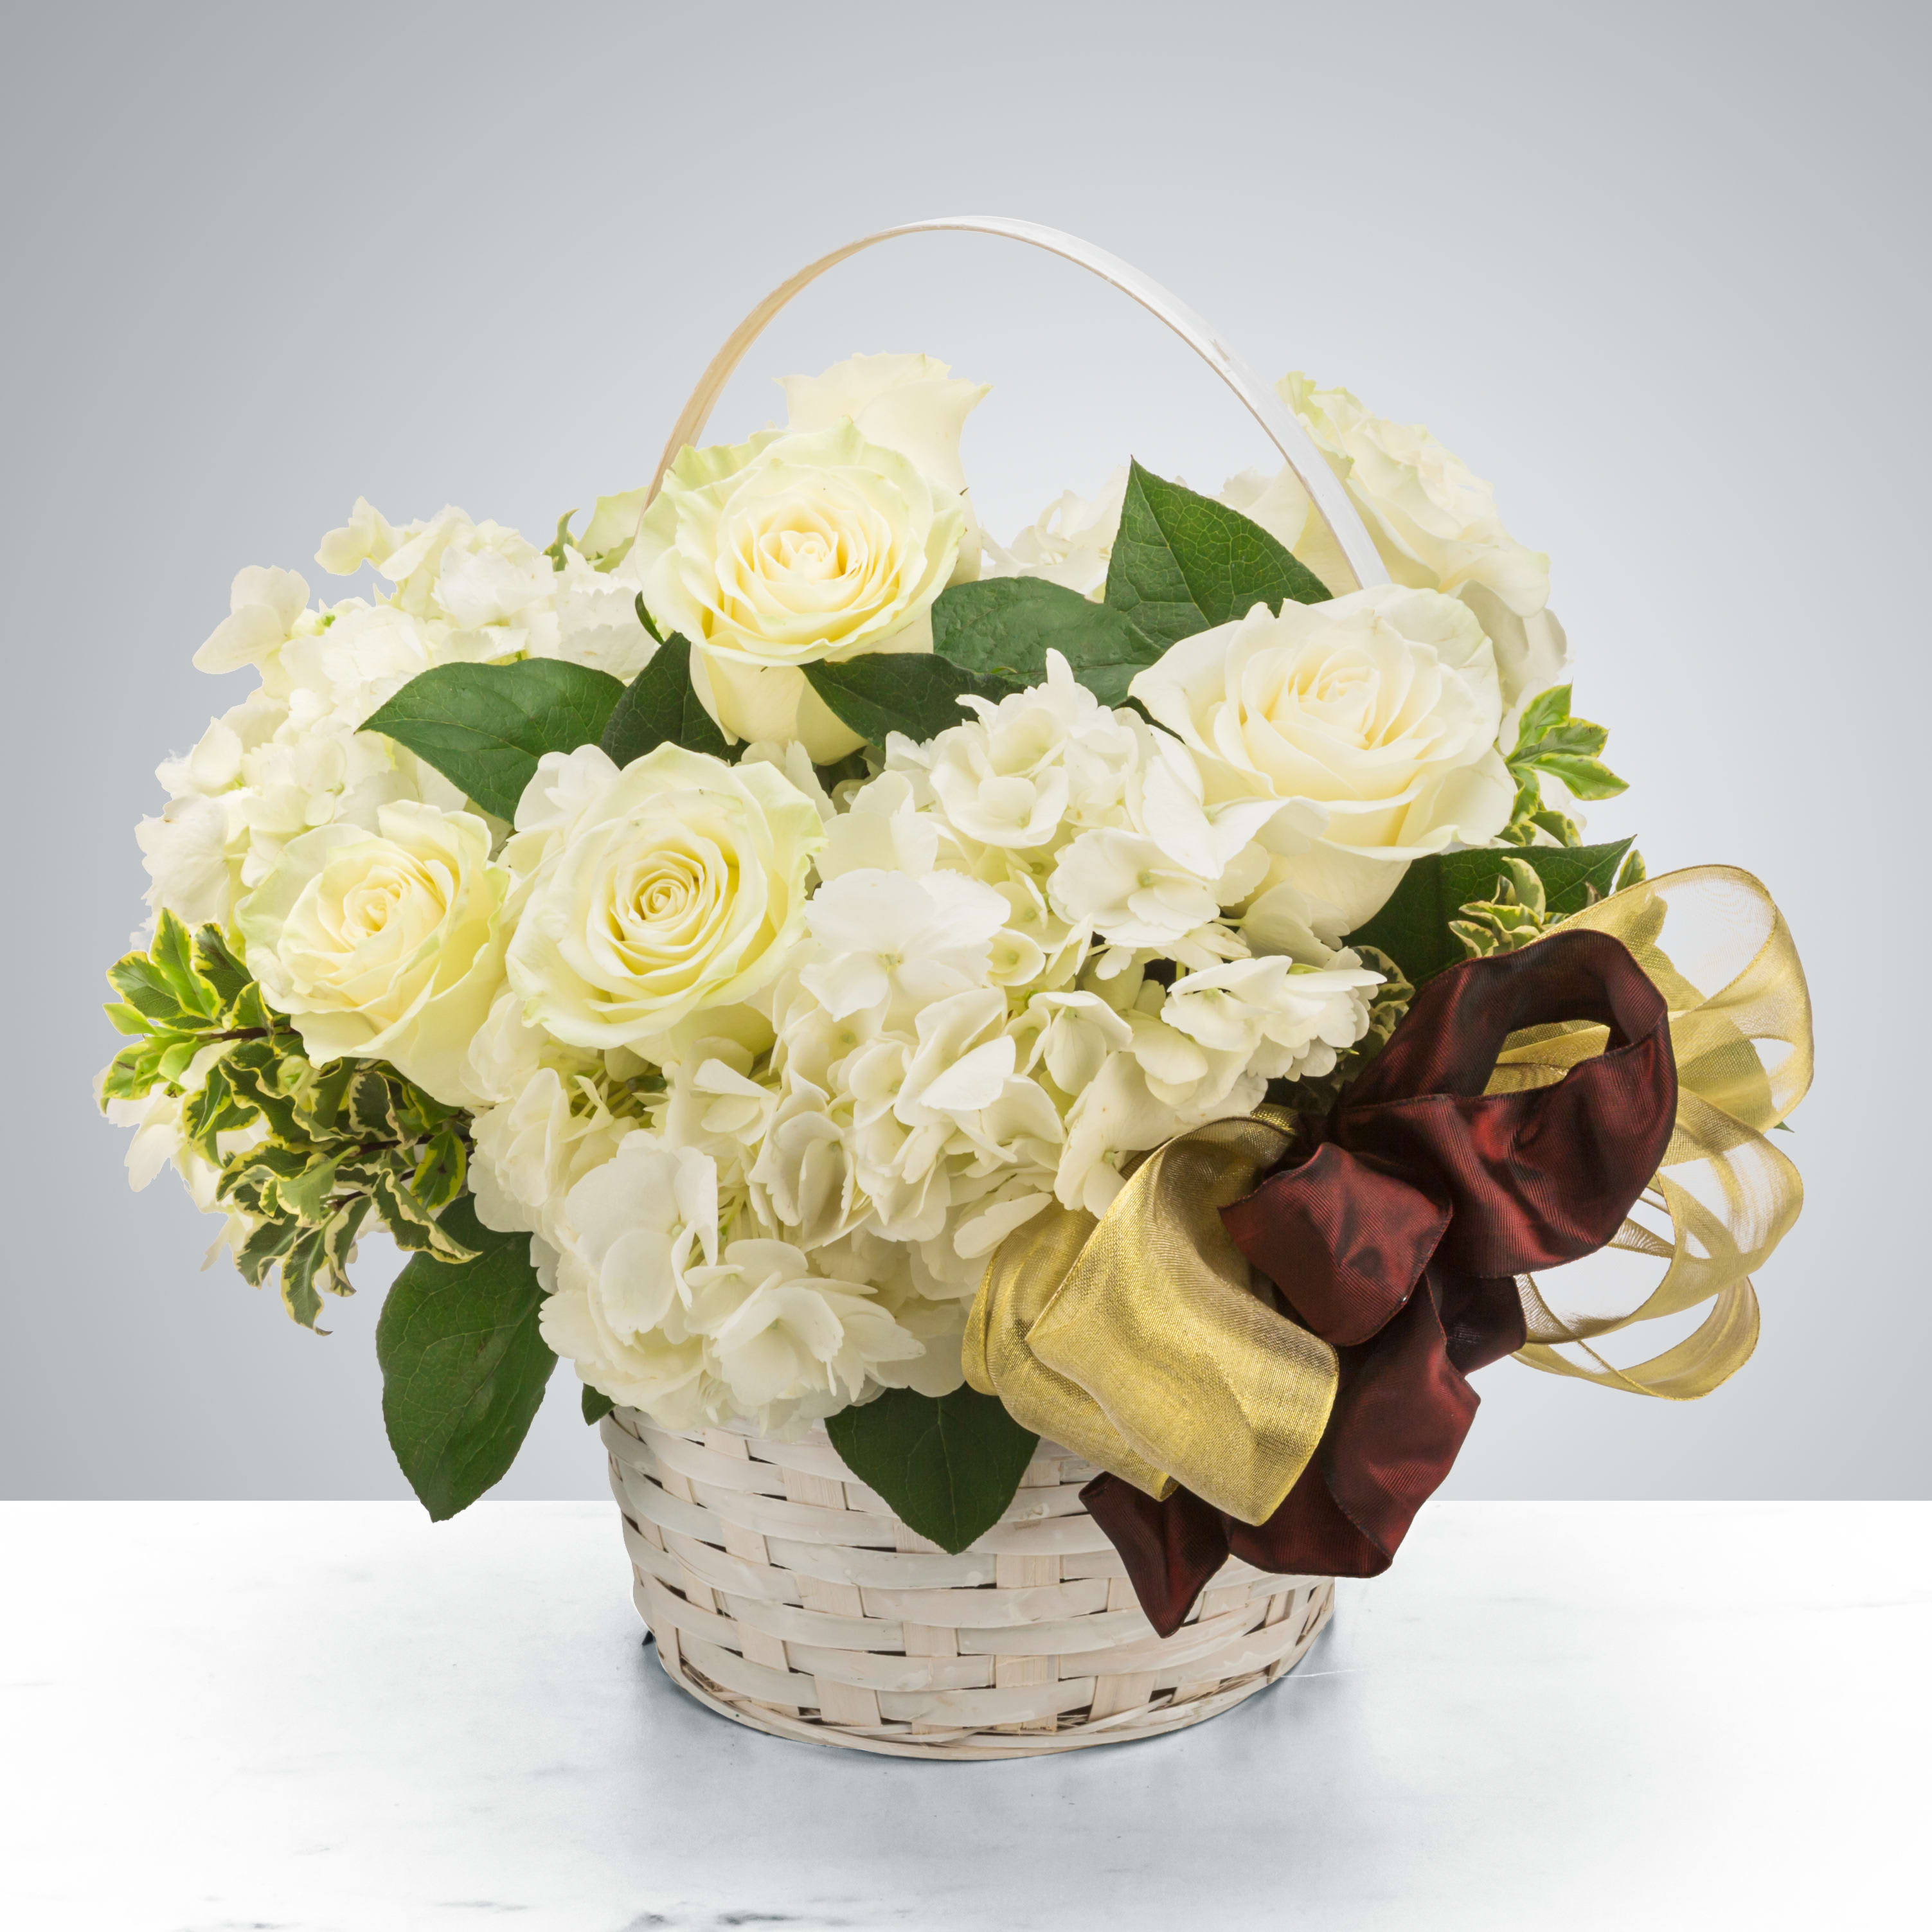 Snowglobe  - White fluffy roses and hydrangeas sit in an all-white basket with a gold and maroon ribbon. Send this to celebrate the winter season! Perfect for all the winter holidays like New Year, Hanukkah, Kwanzaa, and Christmas.  Approximate Dimensions: 14&quot;D x 14&quot;H